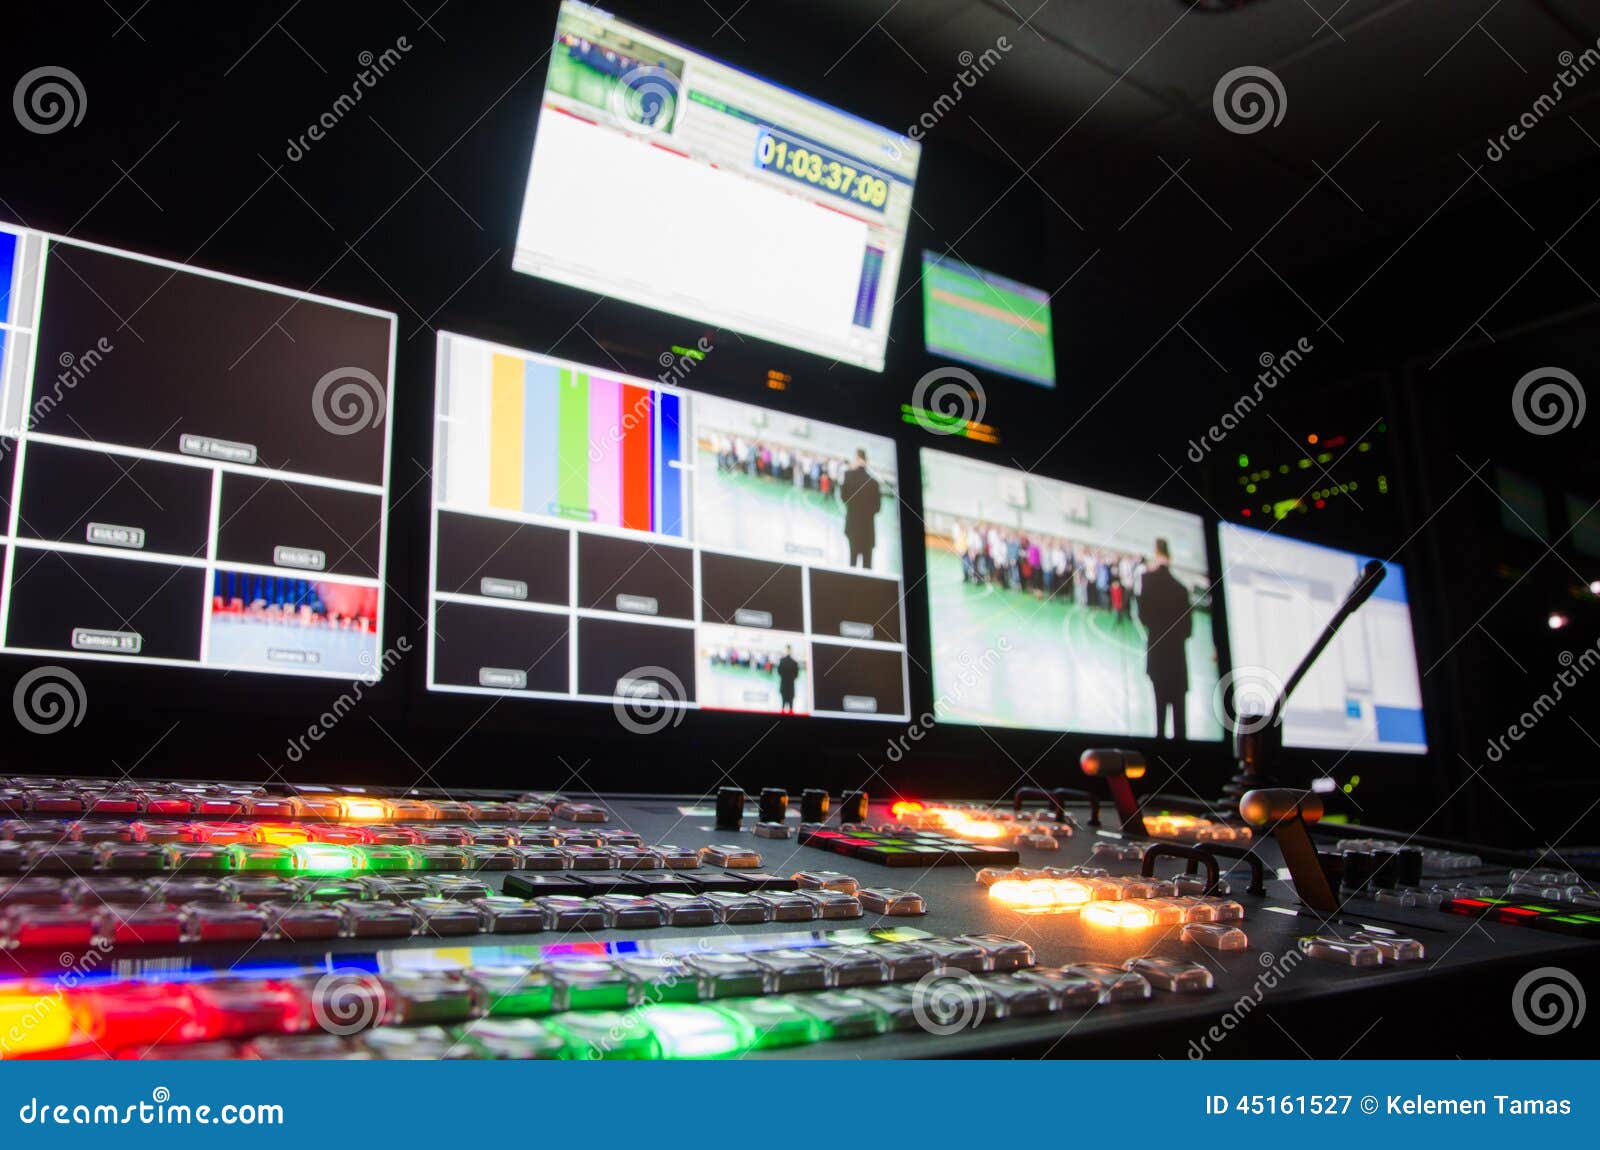 television broadcast room